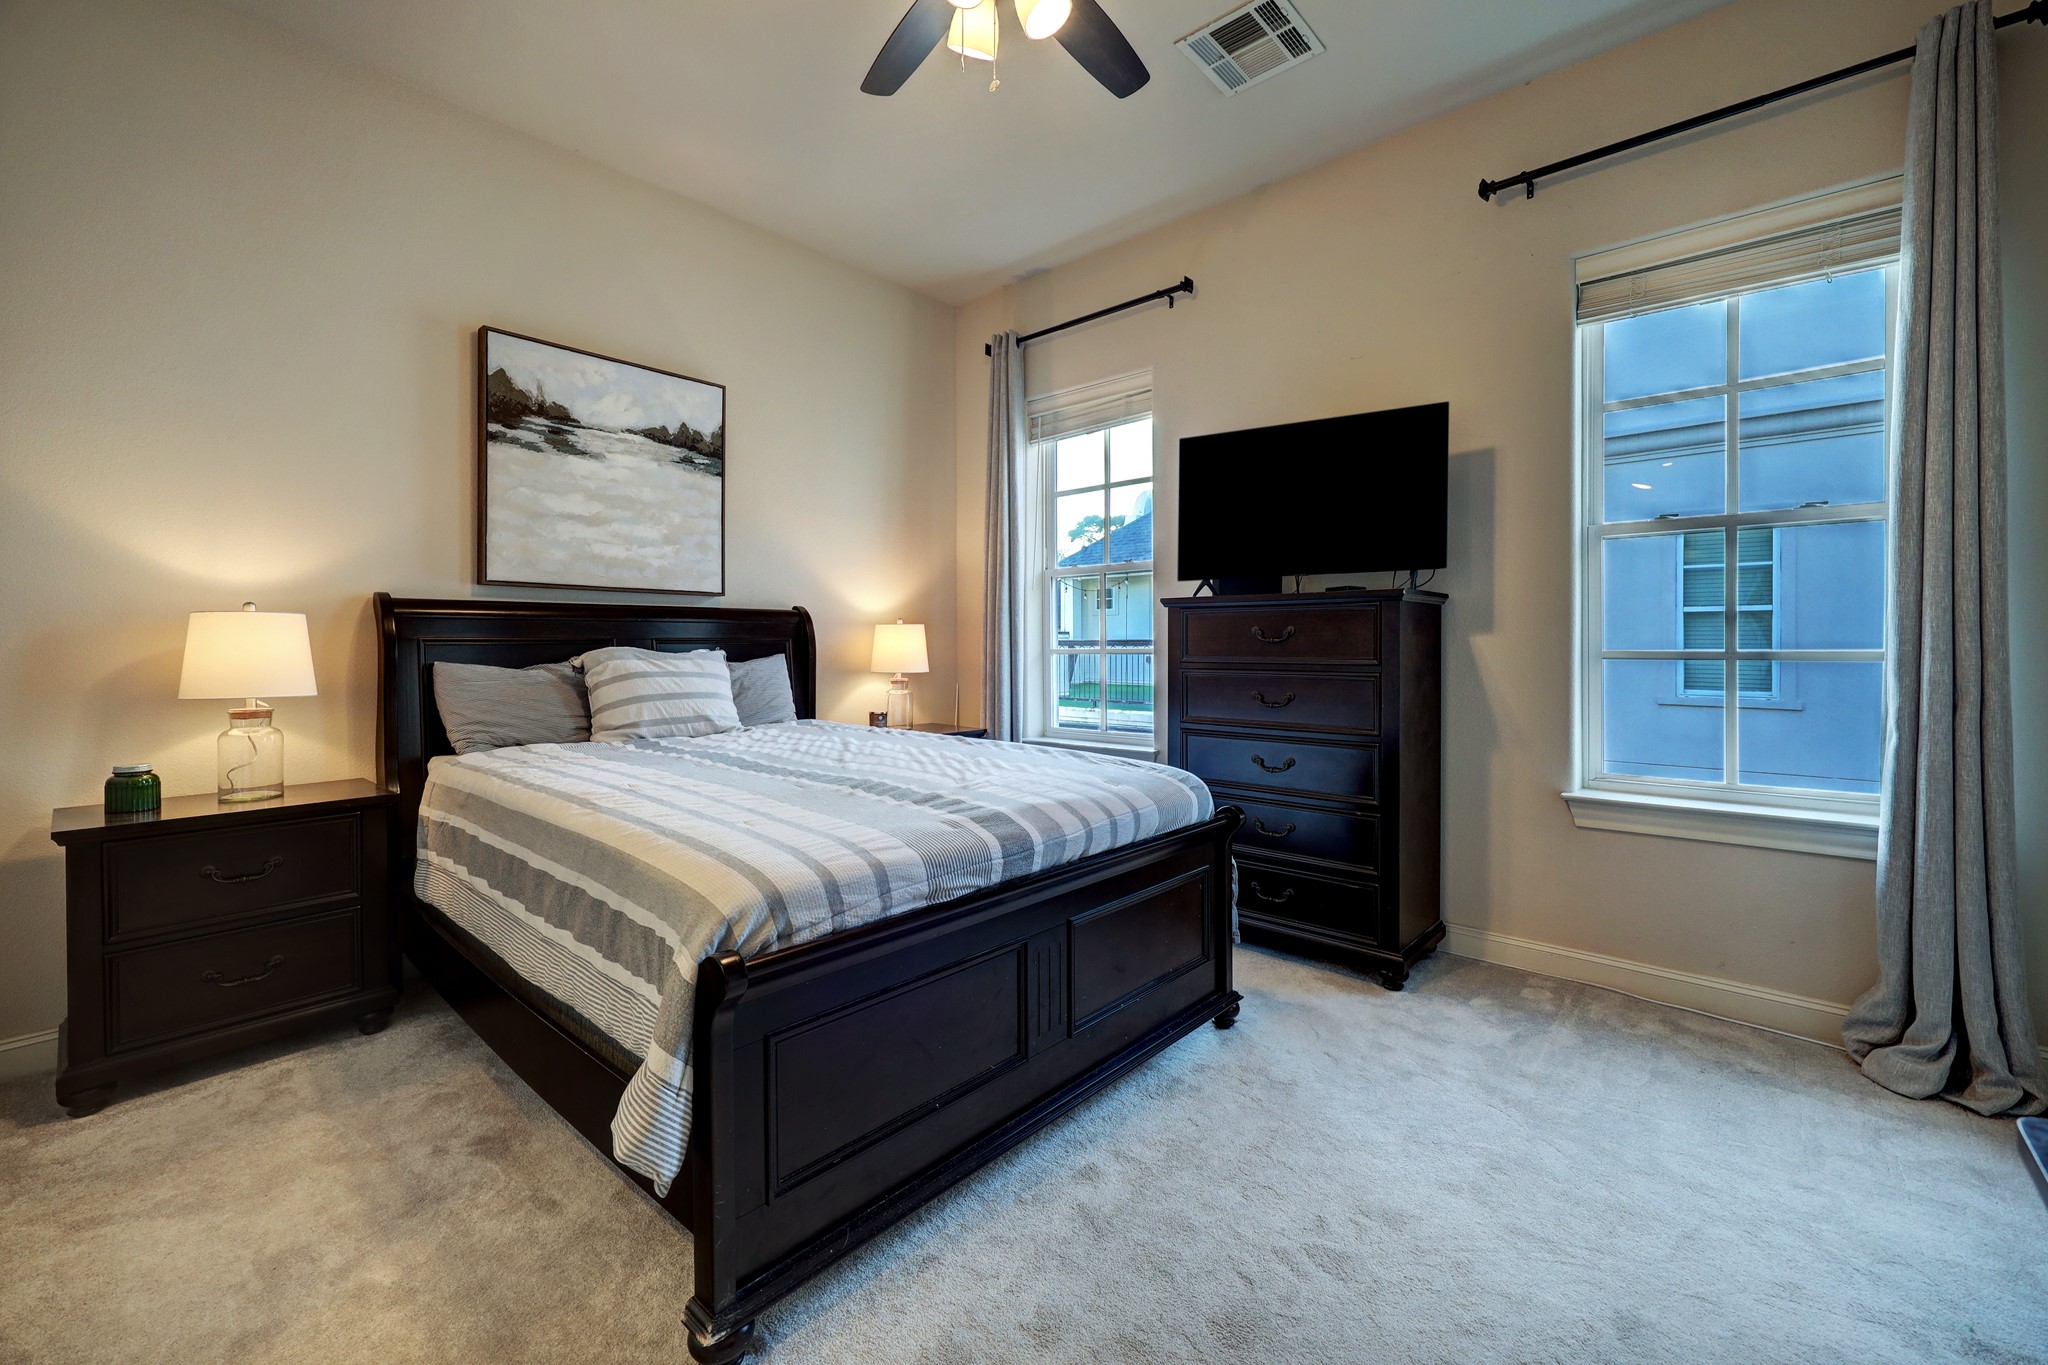 Another lovely bedroom on the third floor with an en-suite bath, a walk-in closet, and ample natural light.